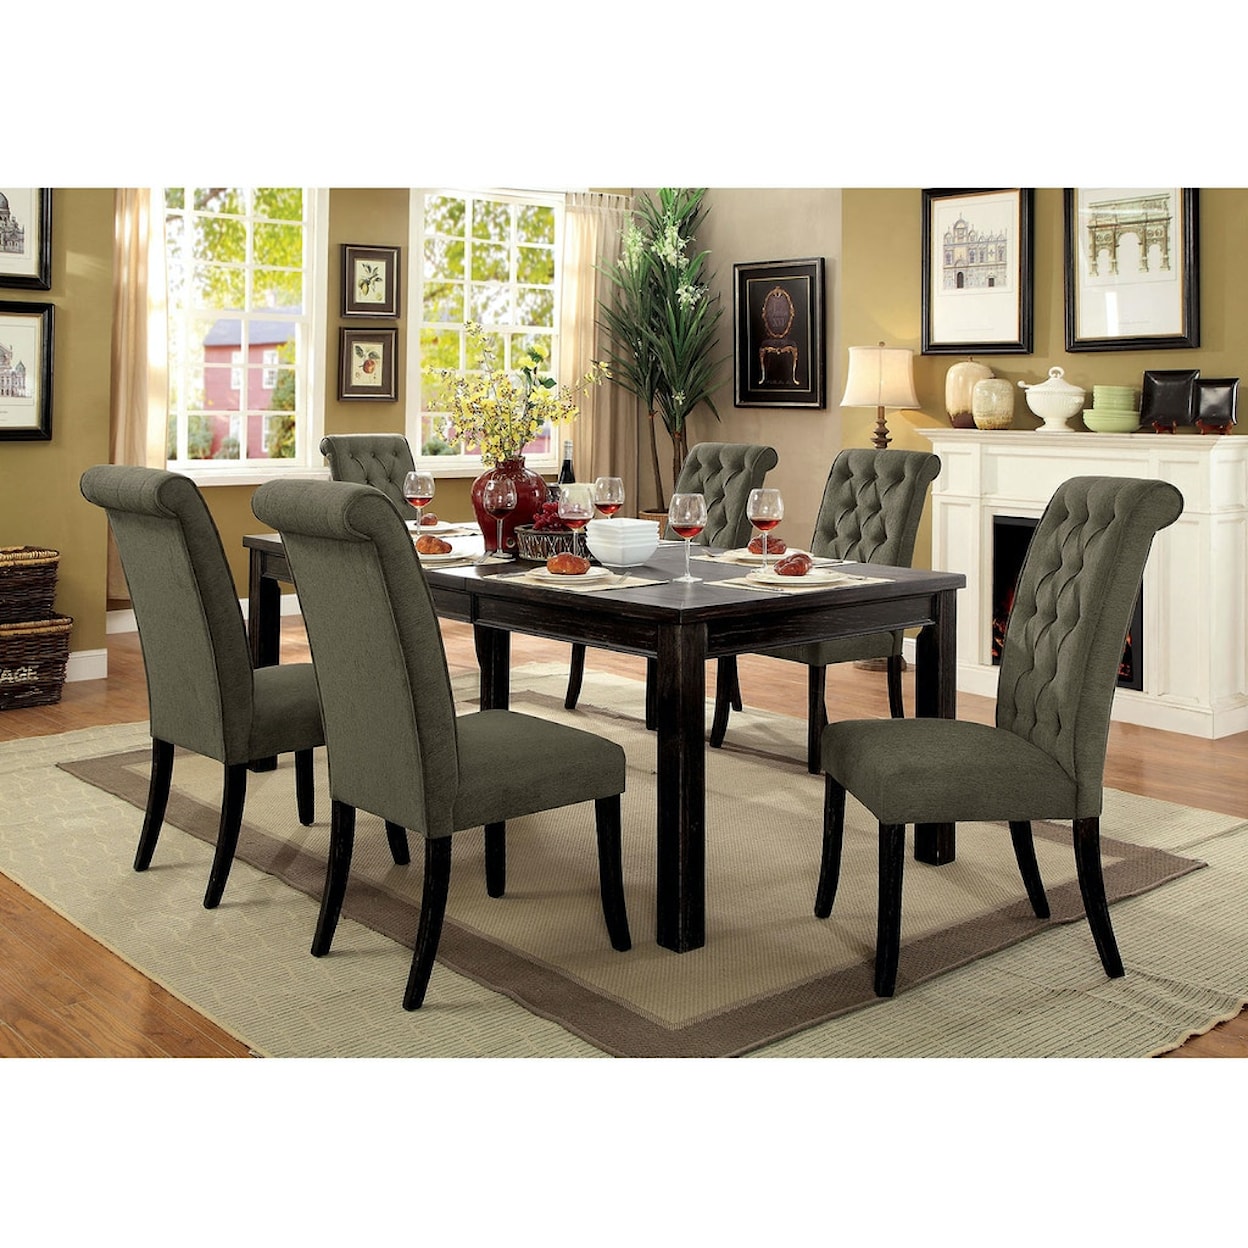 Furniture of America Sania III 7-Piece Table and Chair Set